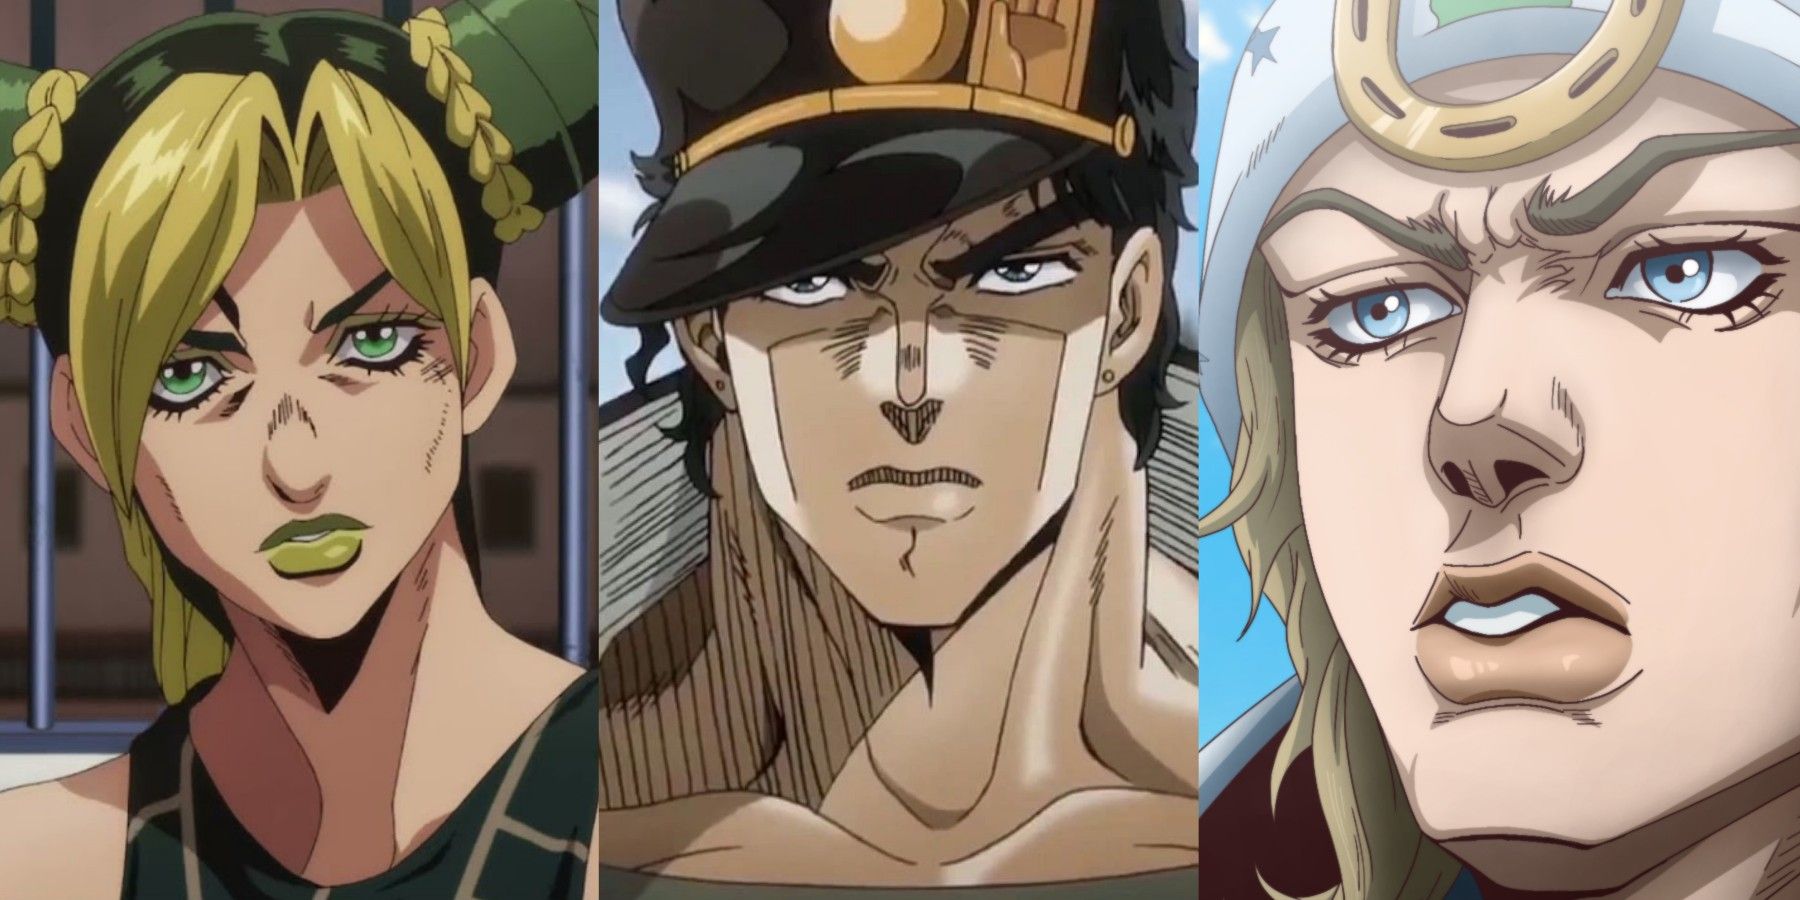 featured things JoJos bizarre adventure does better than most other action shonen anime